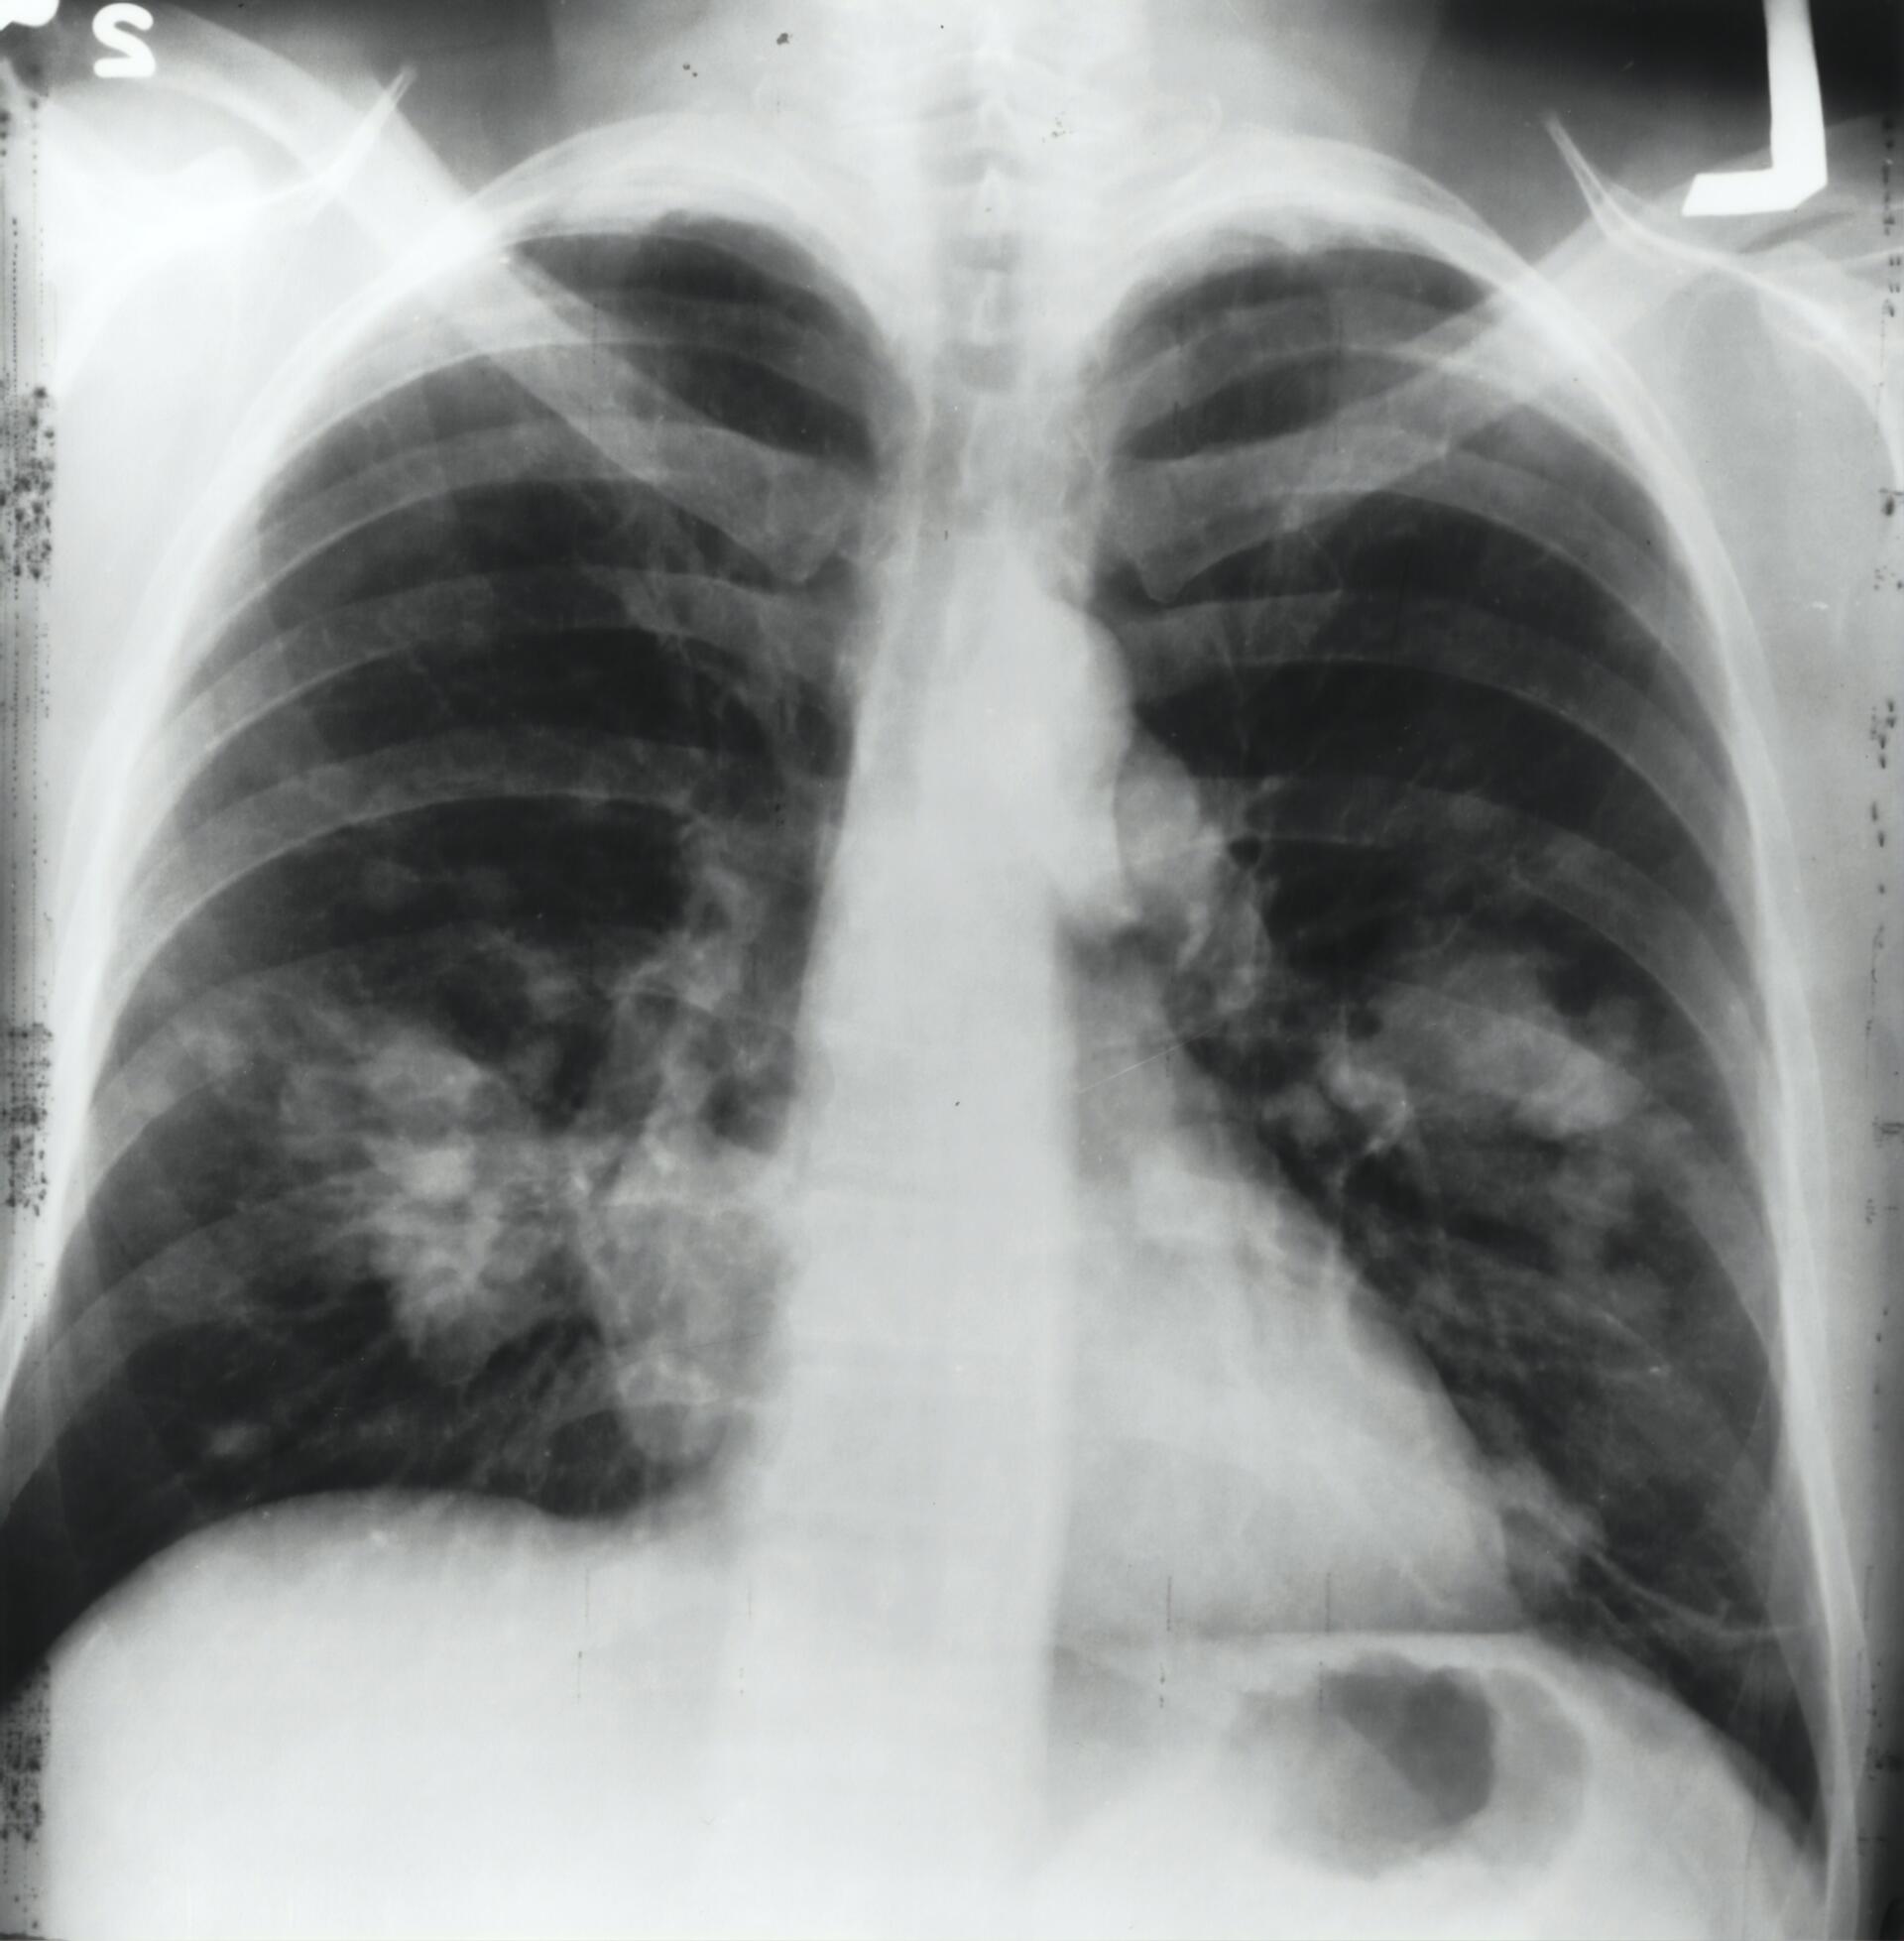 Asbestos related lung cancer